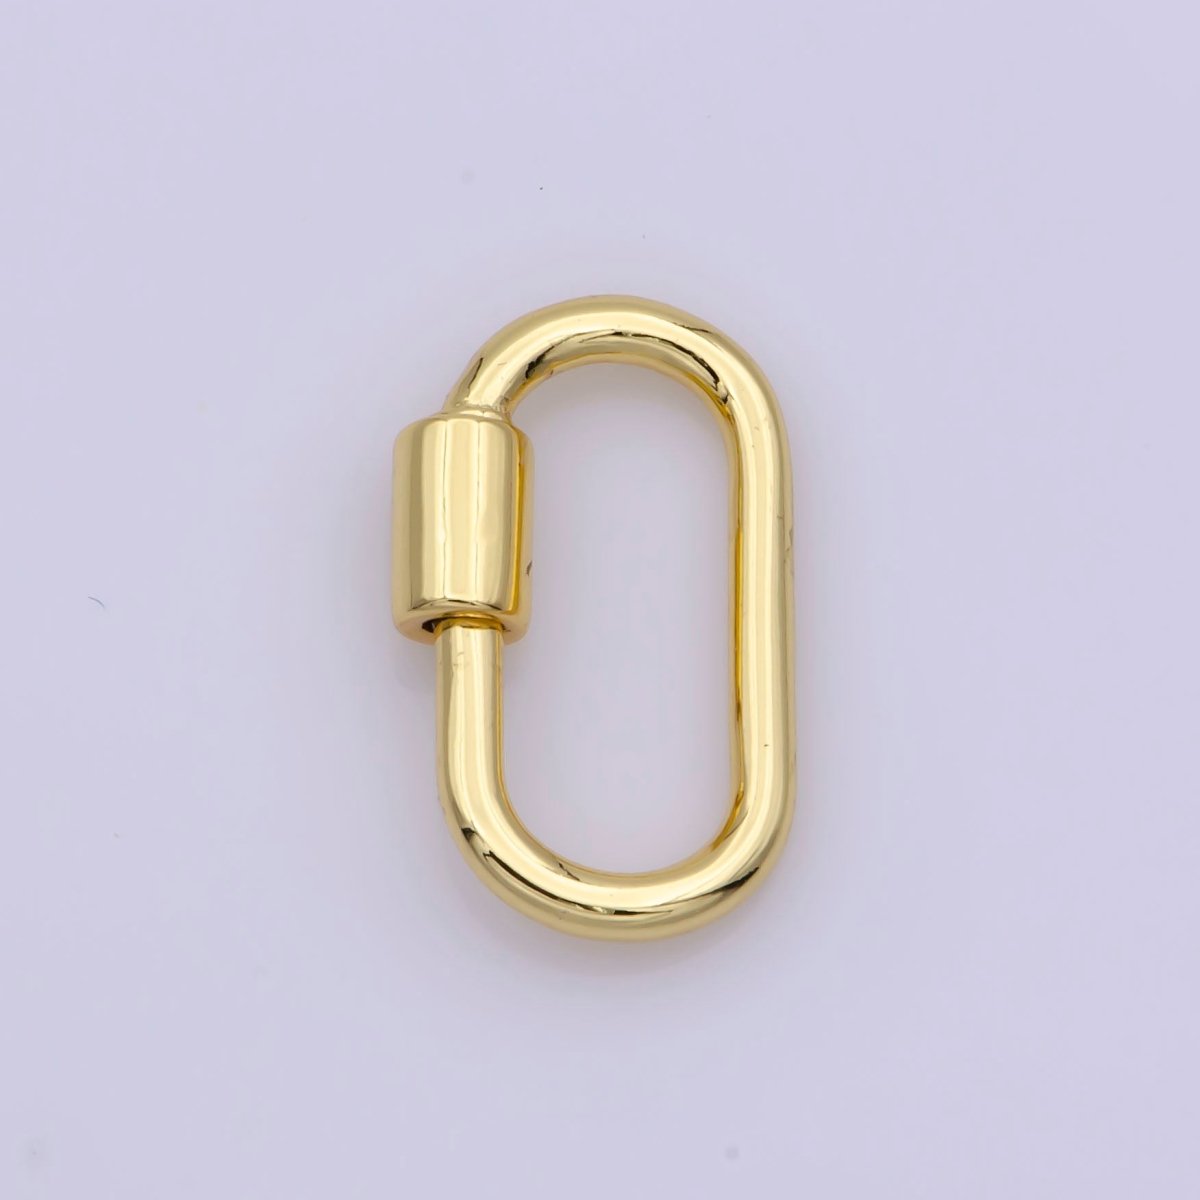 OS Dainty Carabiner Clasp in Gold Filled - Gold Oval with Screw On Mechanism carabiner clasp Bracelet Clasp 16mmx9mm L-531 - DLUXCA